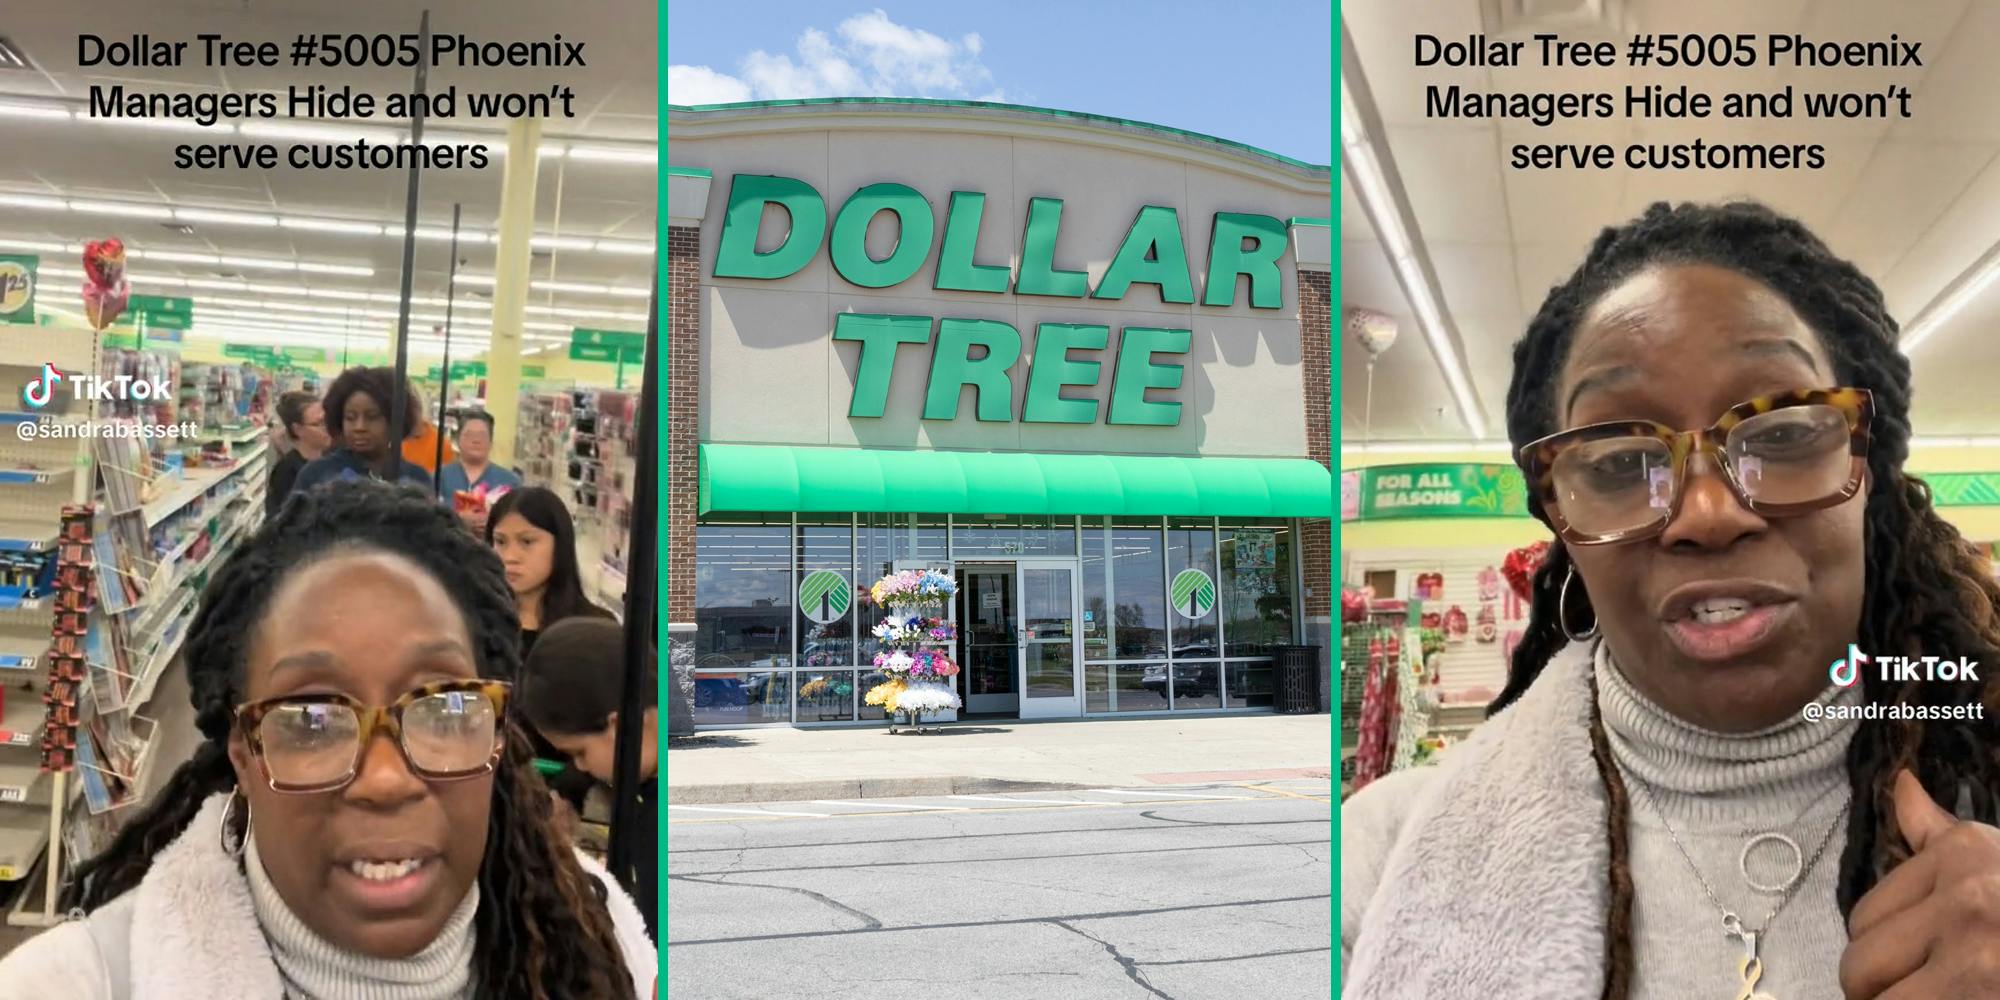 woman in line at Dollar Tree with caption 'Dollar Tree #5005 Phoenix Managers Hide and won't serve customers' (l&r) Dollar Tree sign (c)